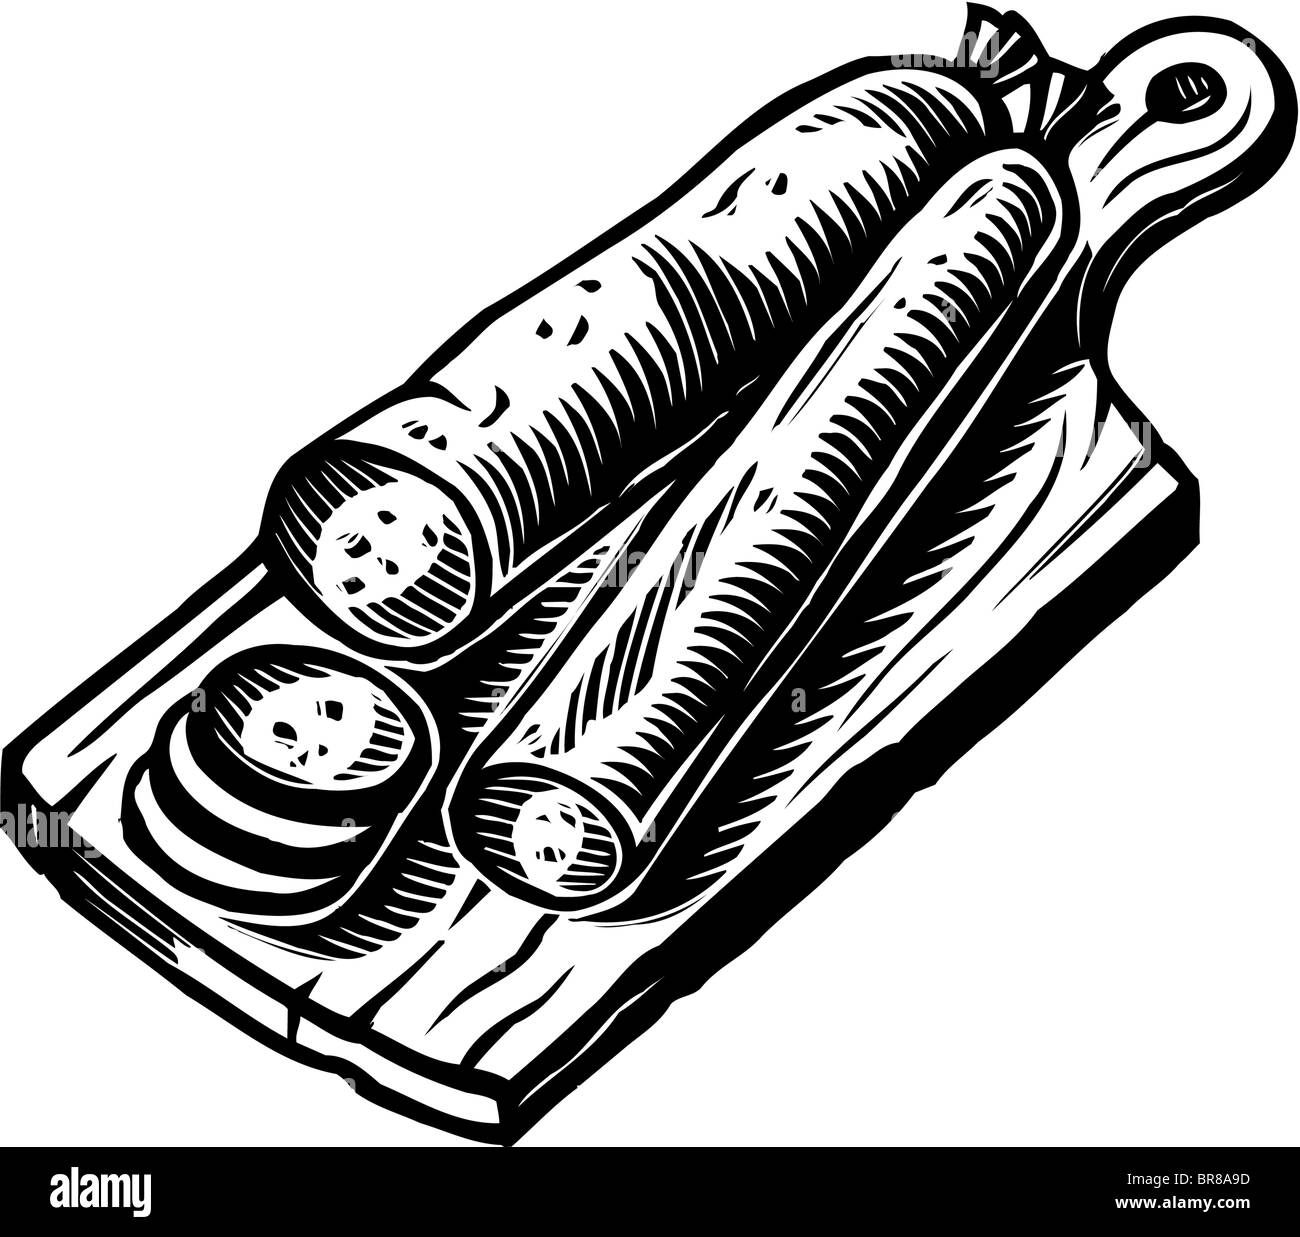 A drawing of Pepperoni sausages on a cutting board Stock Photo